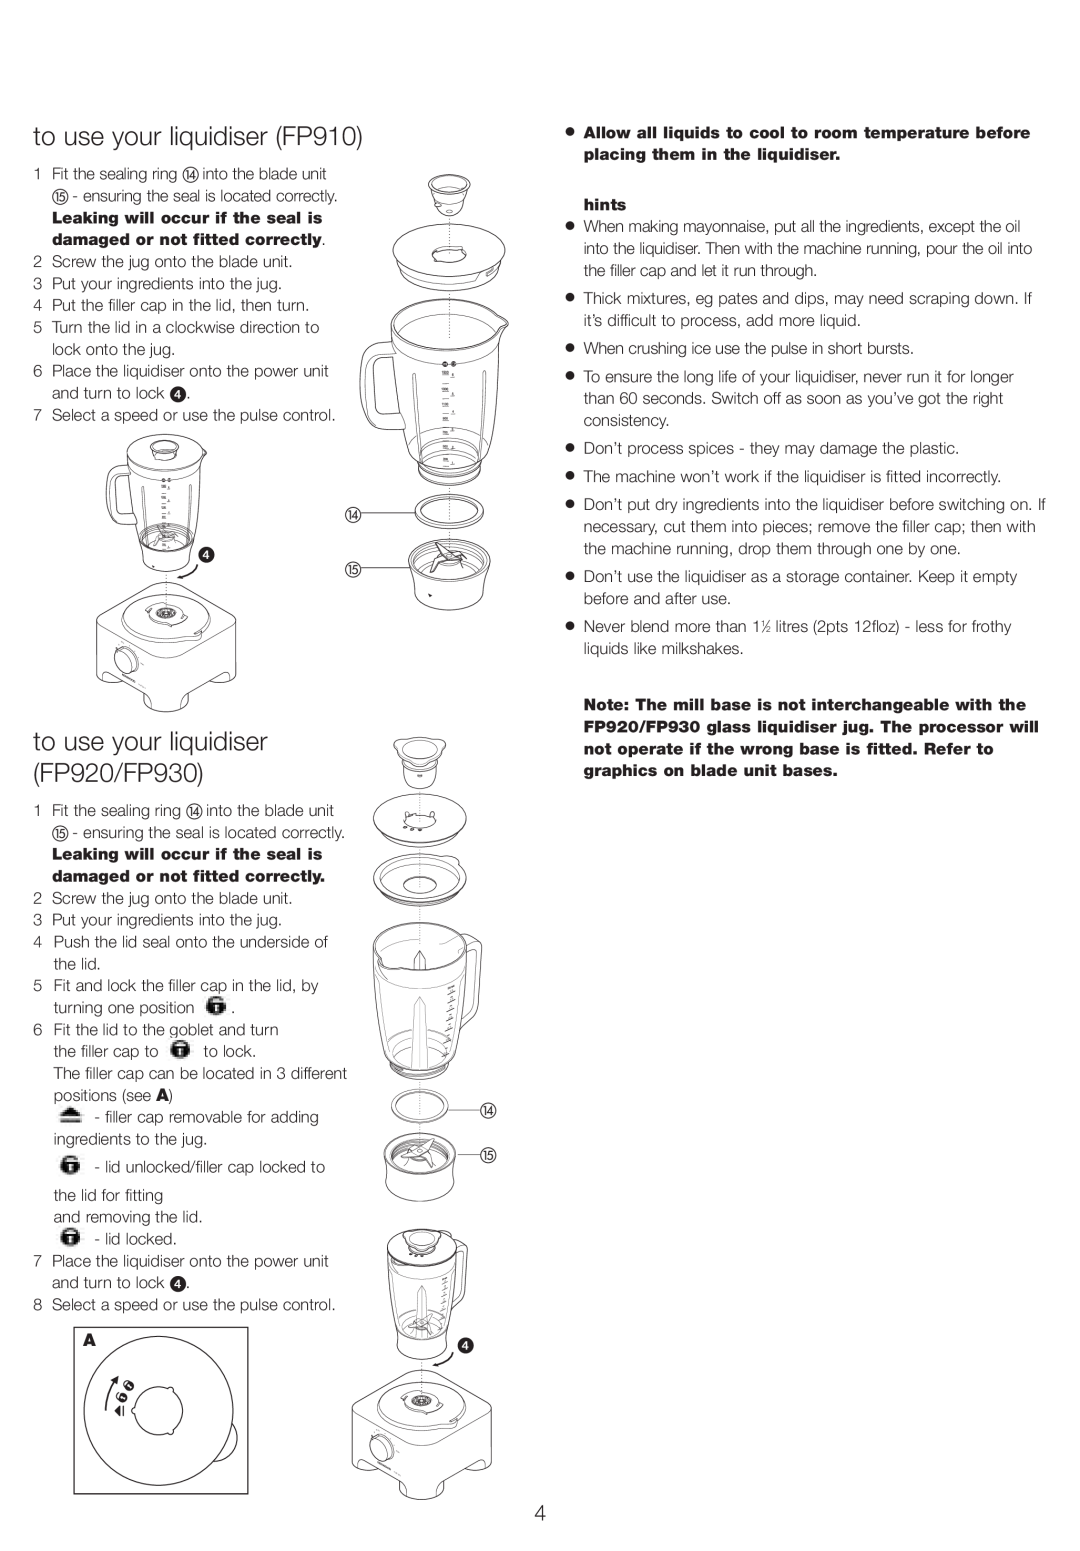 Kenwood FP905 manual to use your liquidiser FP910, to use your liquidiser FP920/FP930 